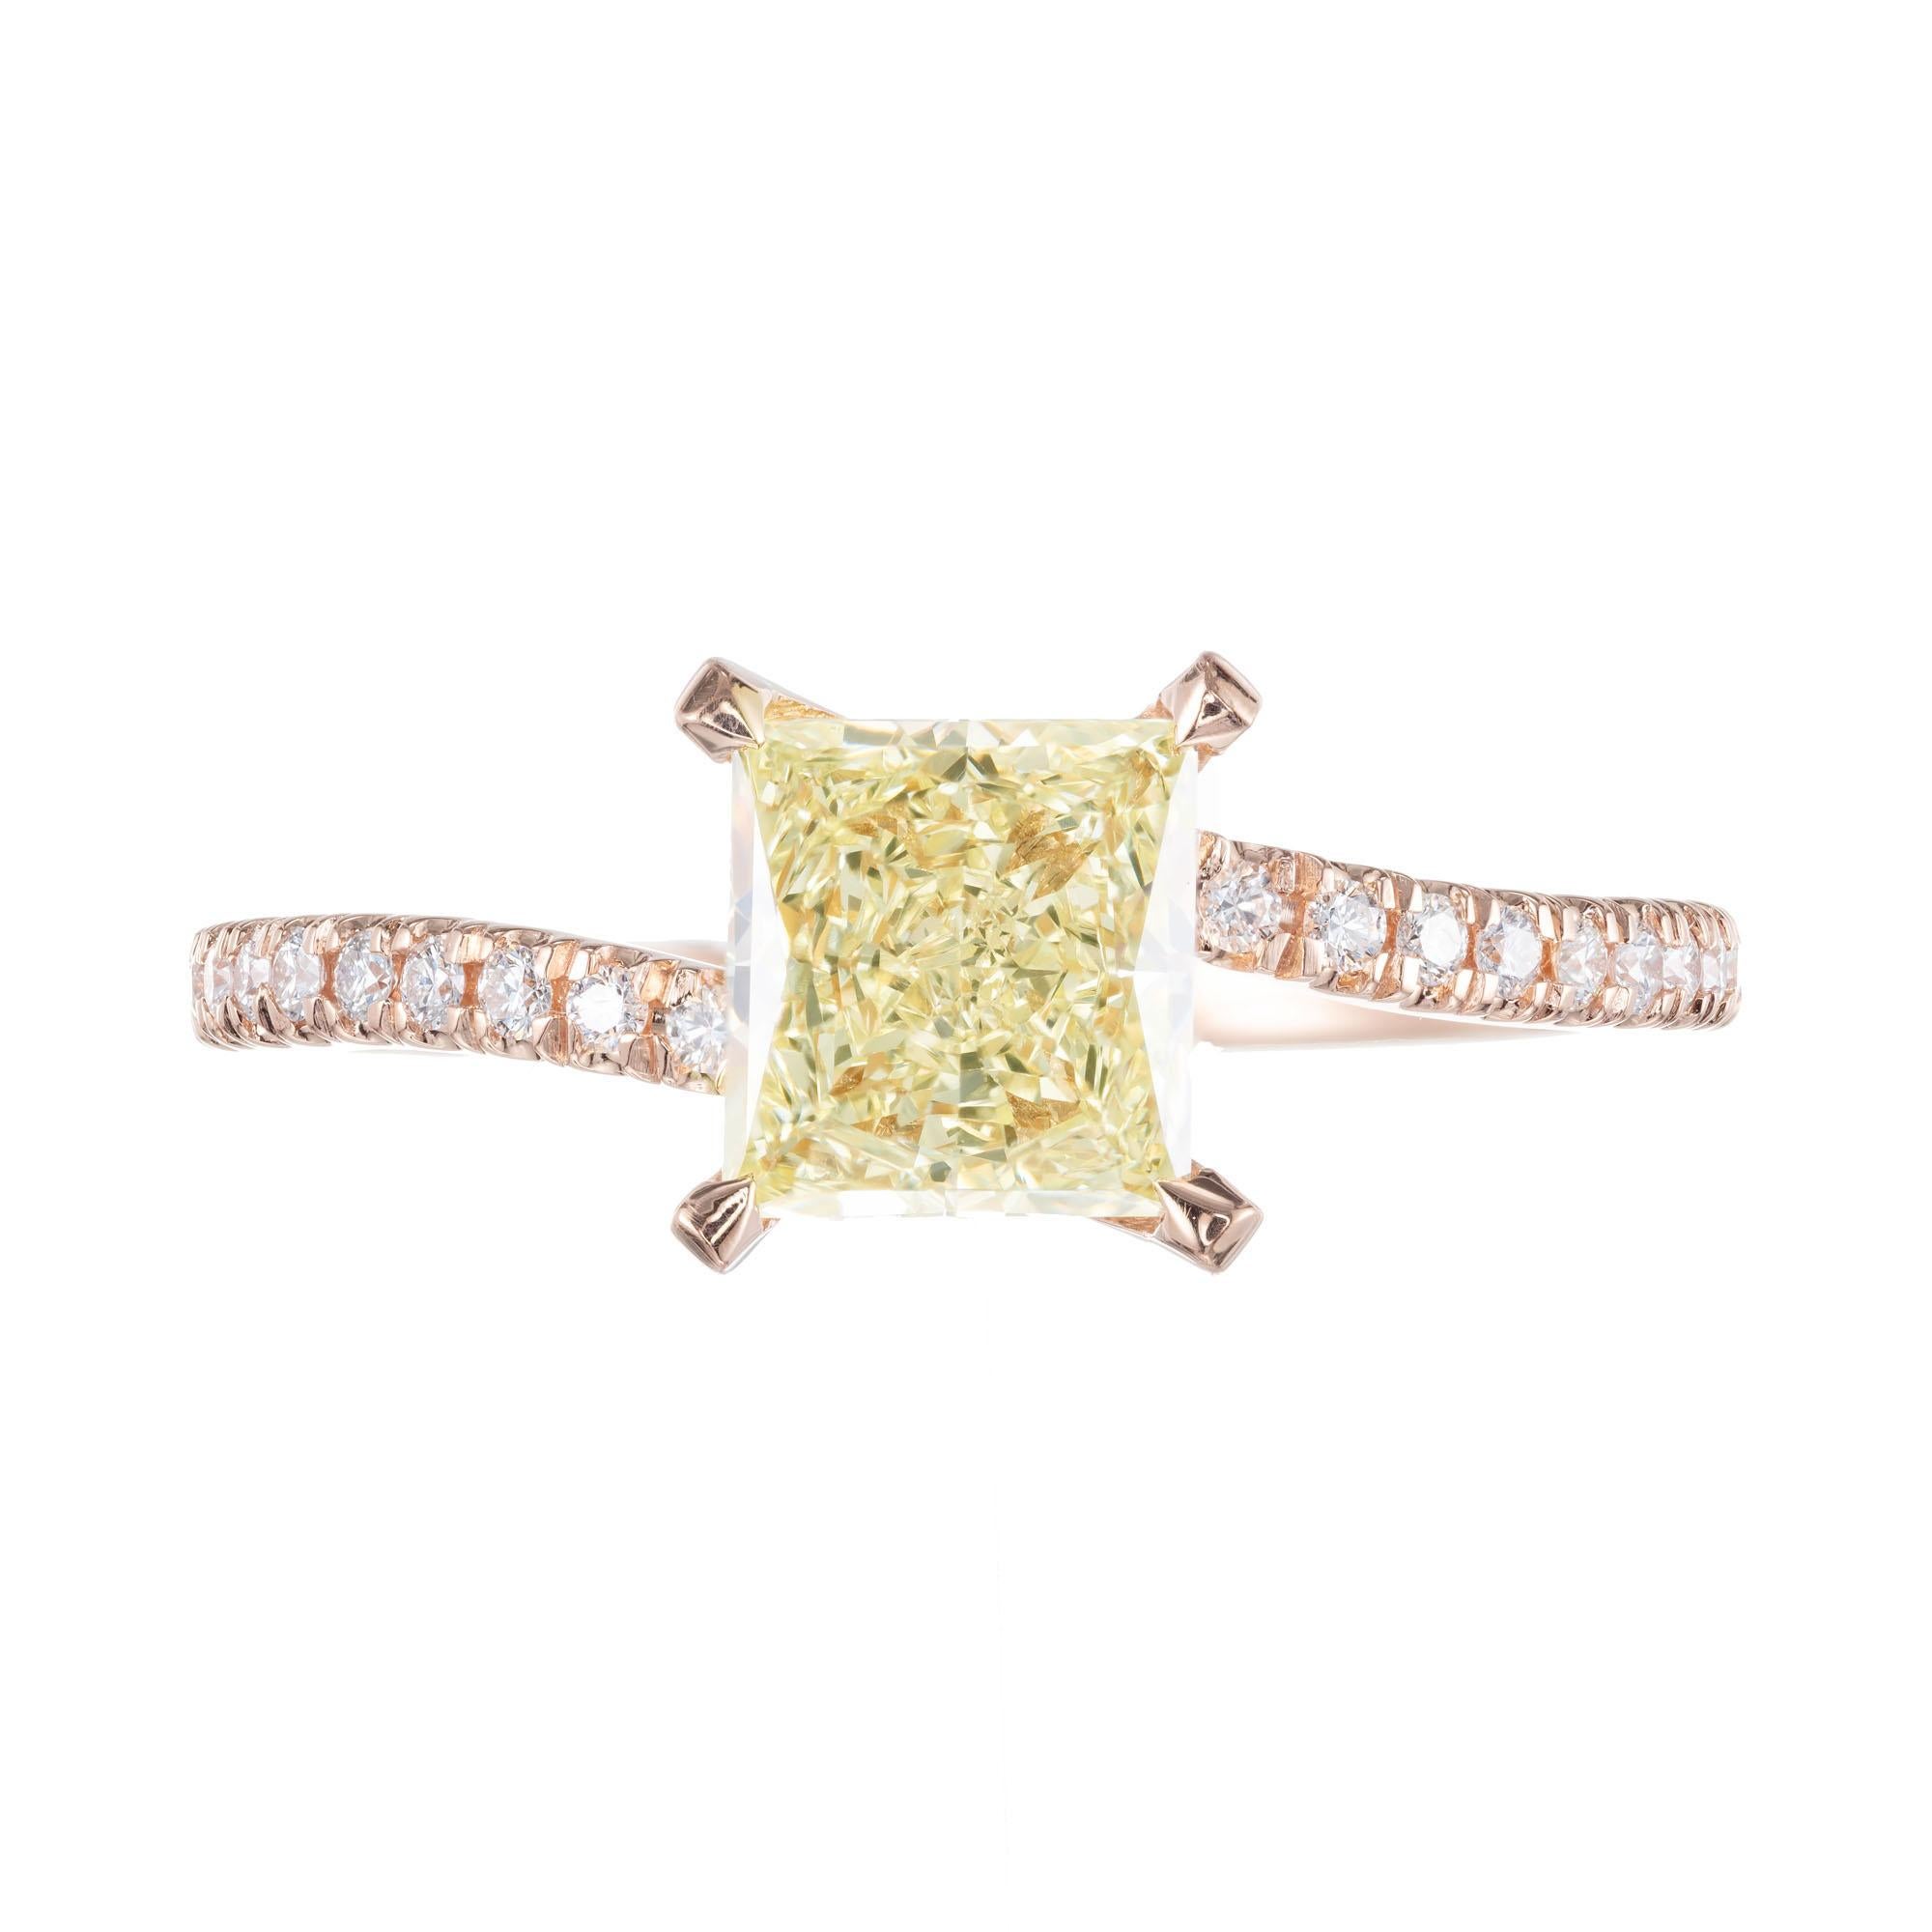 Peter Suchy simple bypass style 18k rose gold diamond engagement ring. GIA certified 1.08 princess cut light yellow center stone. Created in the Peter Suchy Workshop.  

1 princess cut diamond W-X VS2, approx. 1.08ct GIA Certificate # 6207223918
20